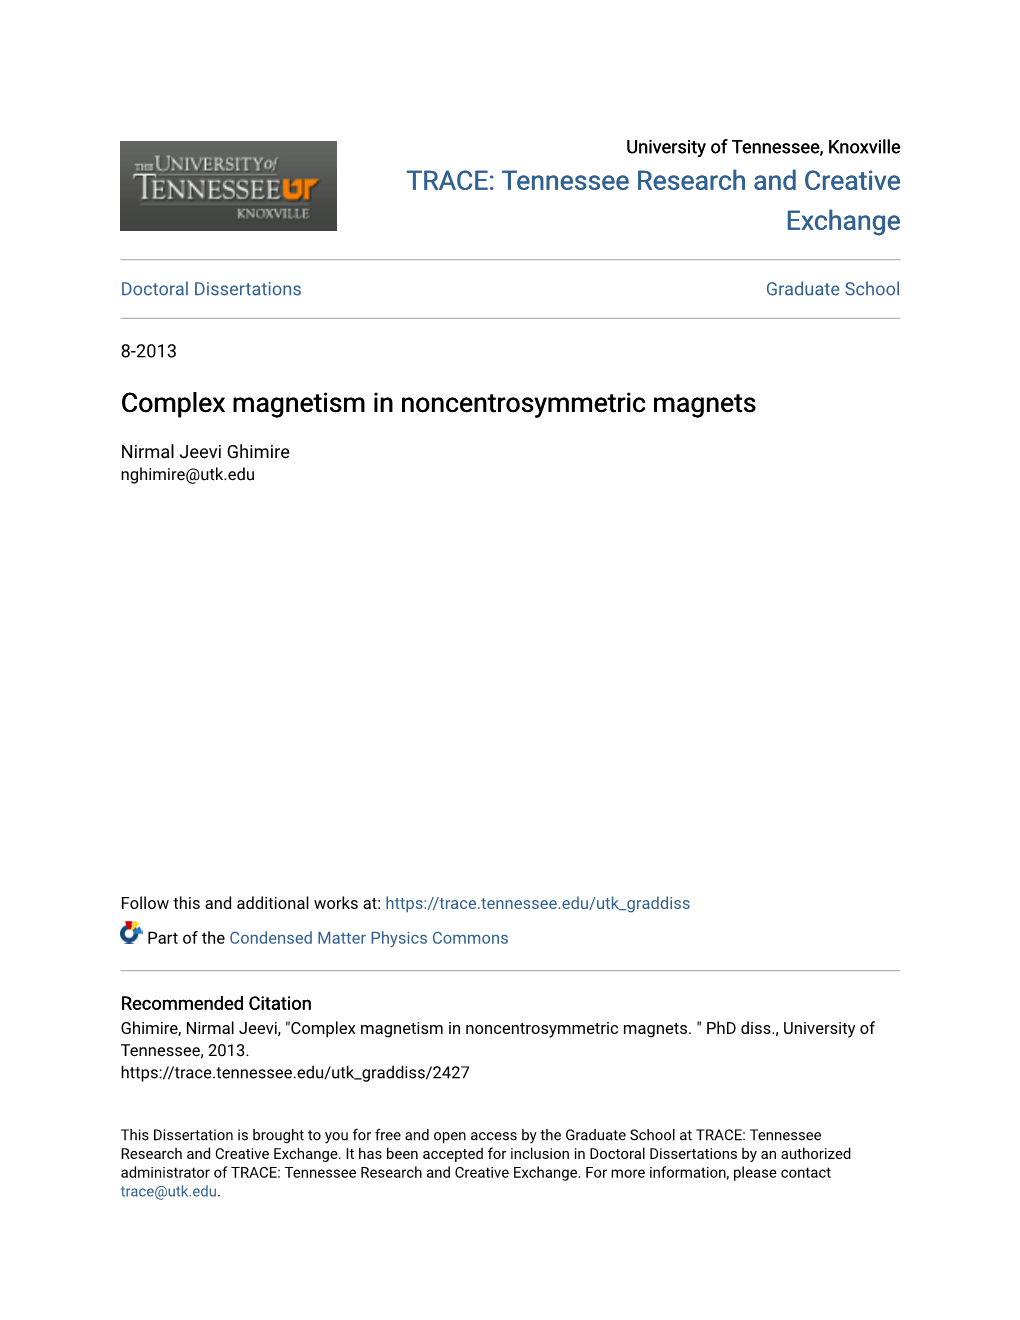 Complex Magnetism in Noncentrosymmetric Magnets